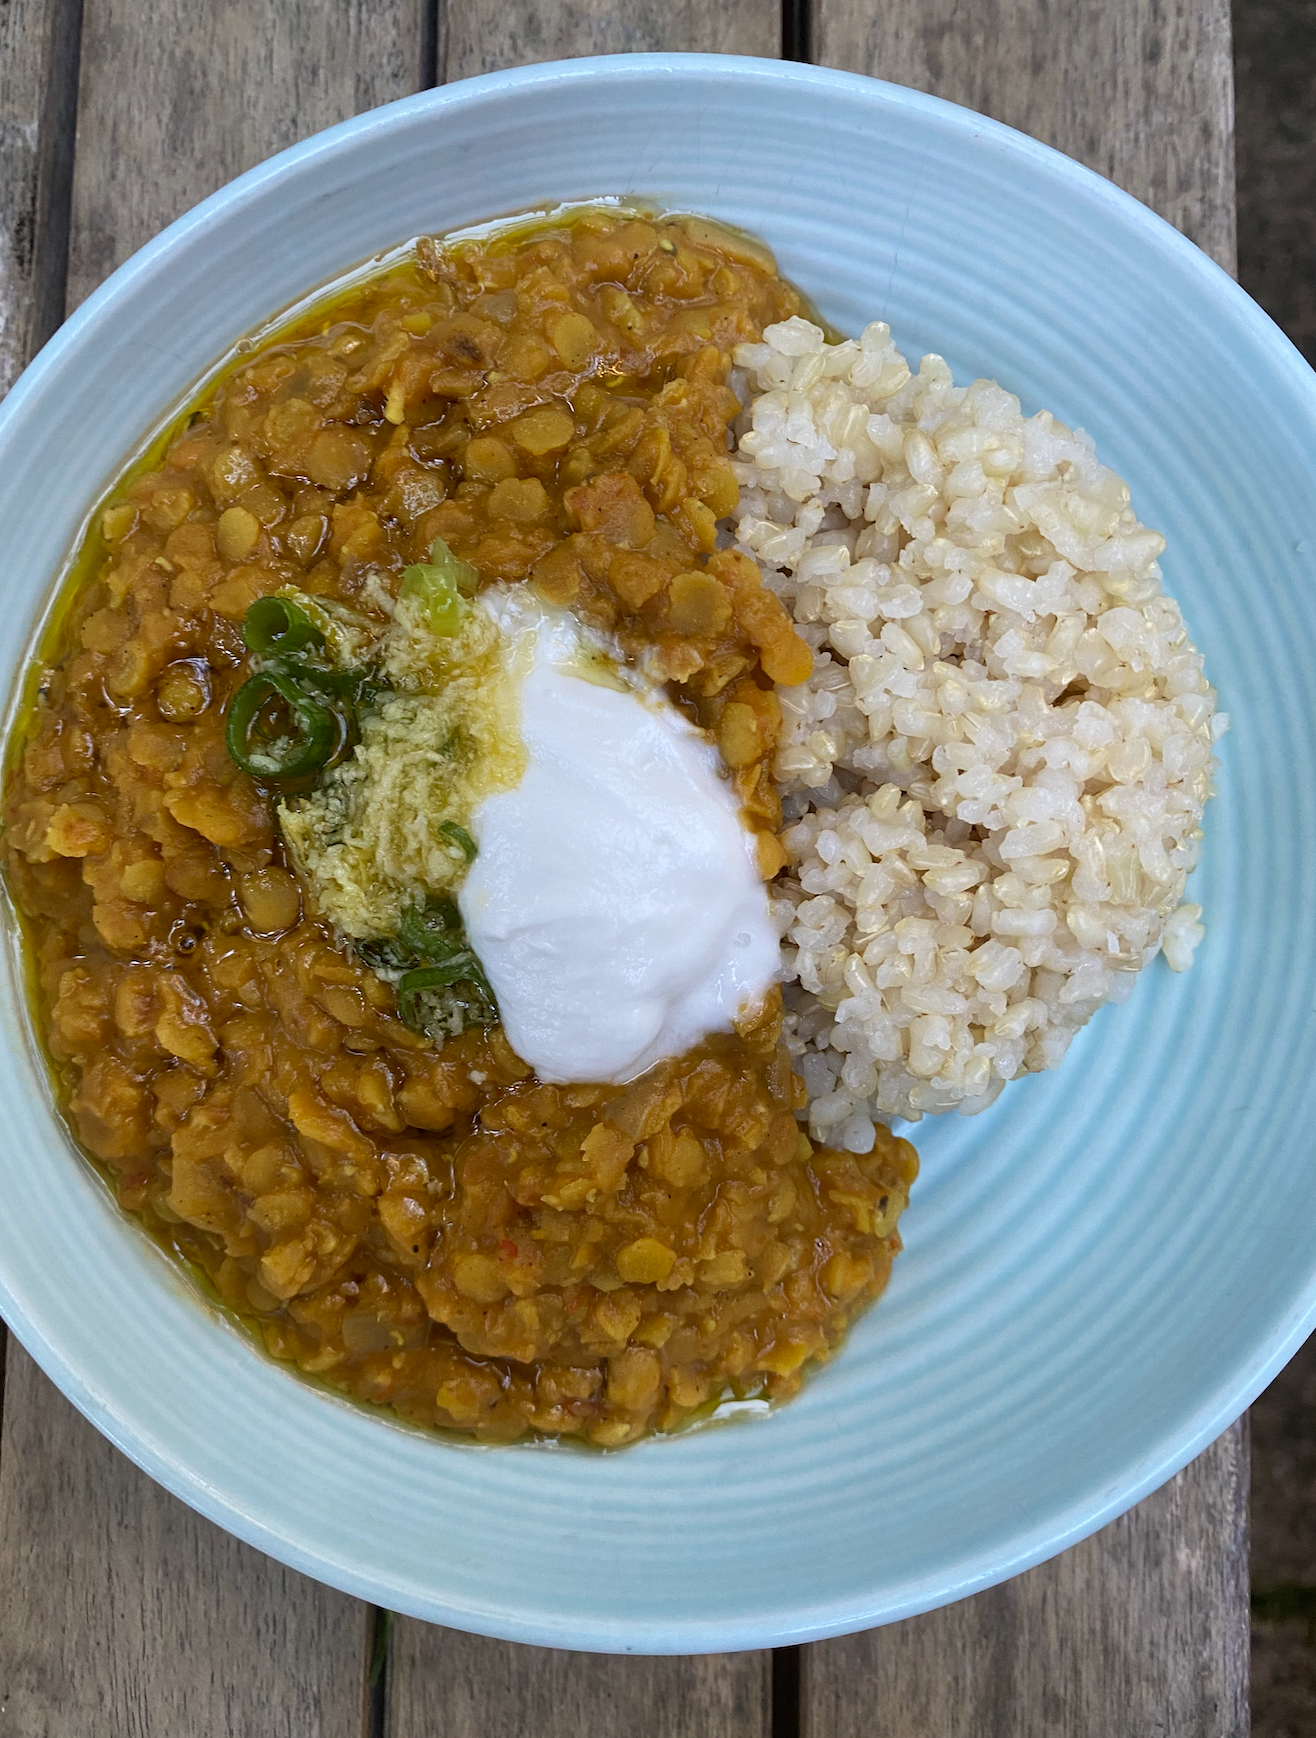 Plant Based Meals: Ginger Turmeric Red Lentil Dahl with Brown Rice & Greens